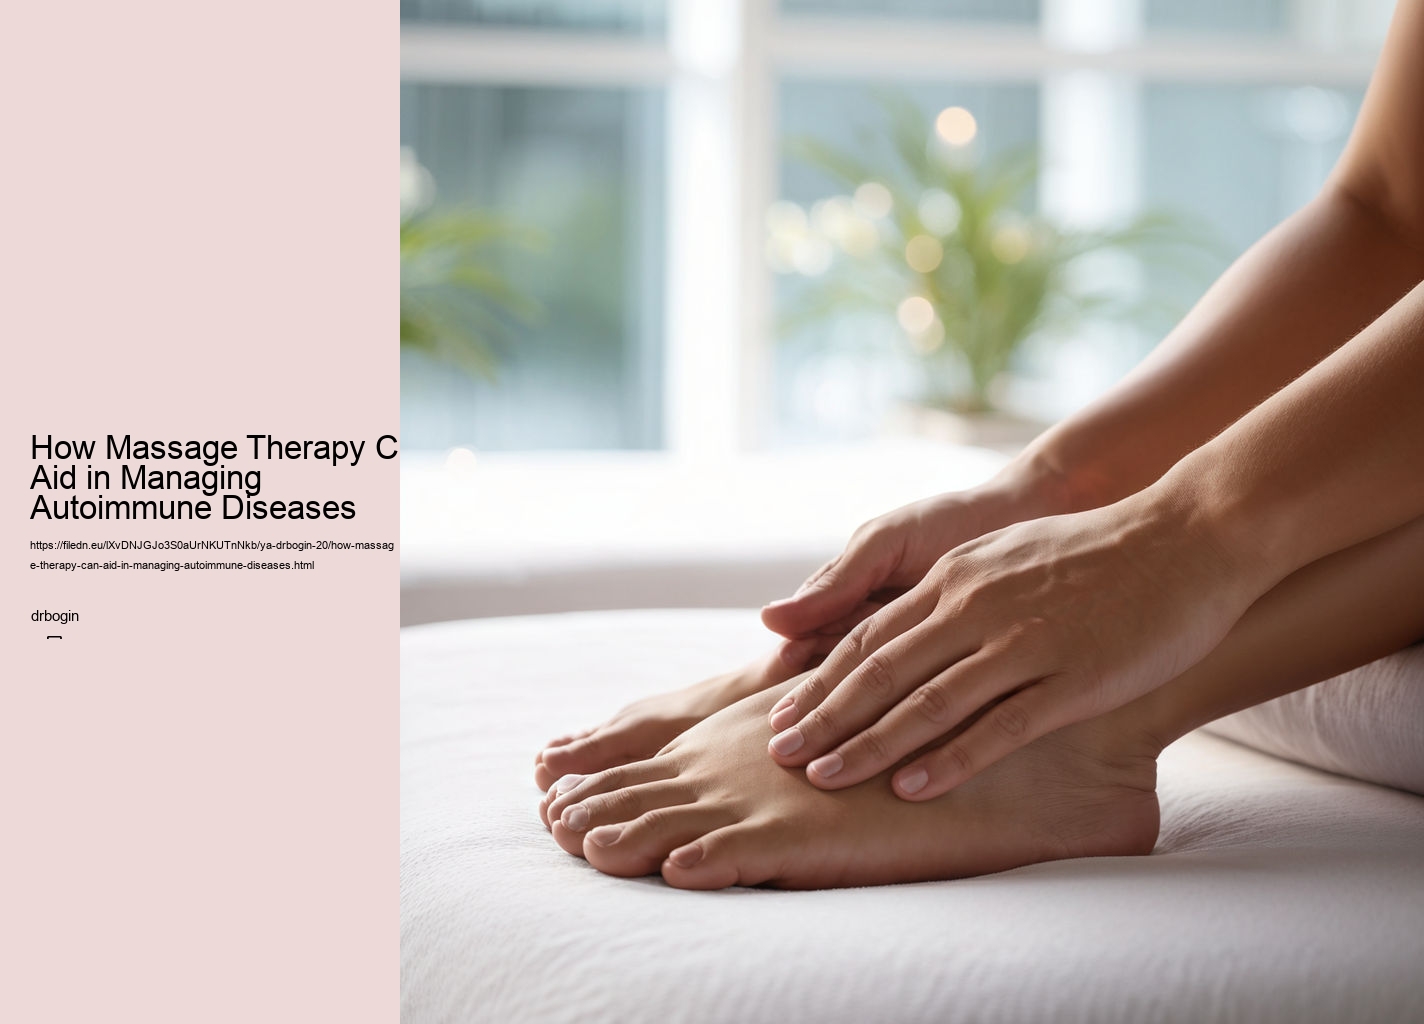 How Massage Therapy Can Aid in Managing Autoimmune Diseases